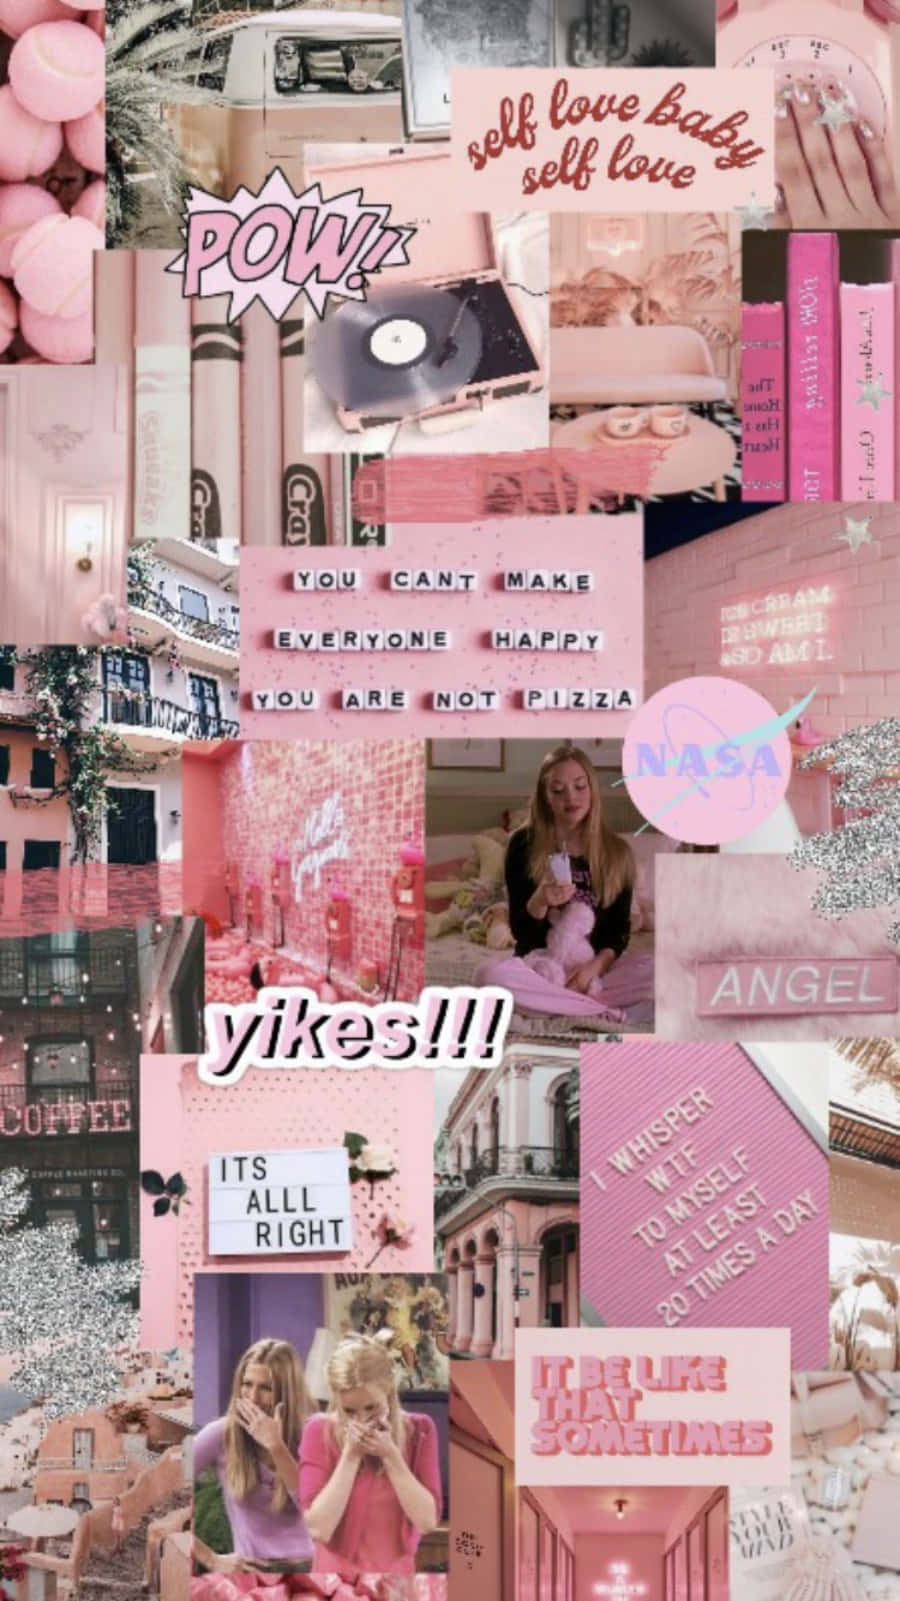 35 Pink Aesthetic Wallpapers with Quotes and Collages